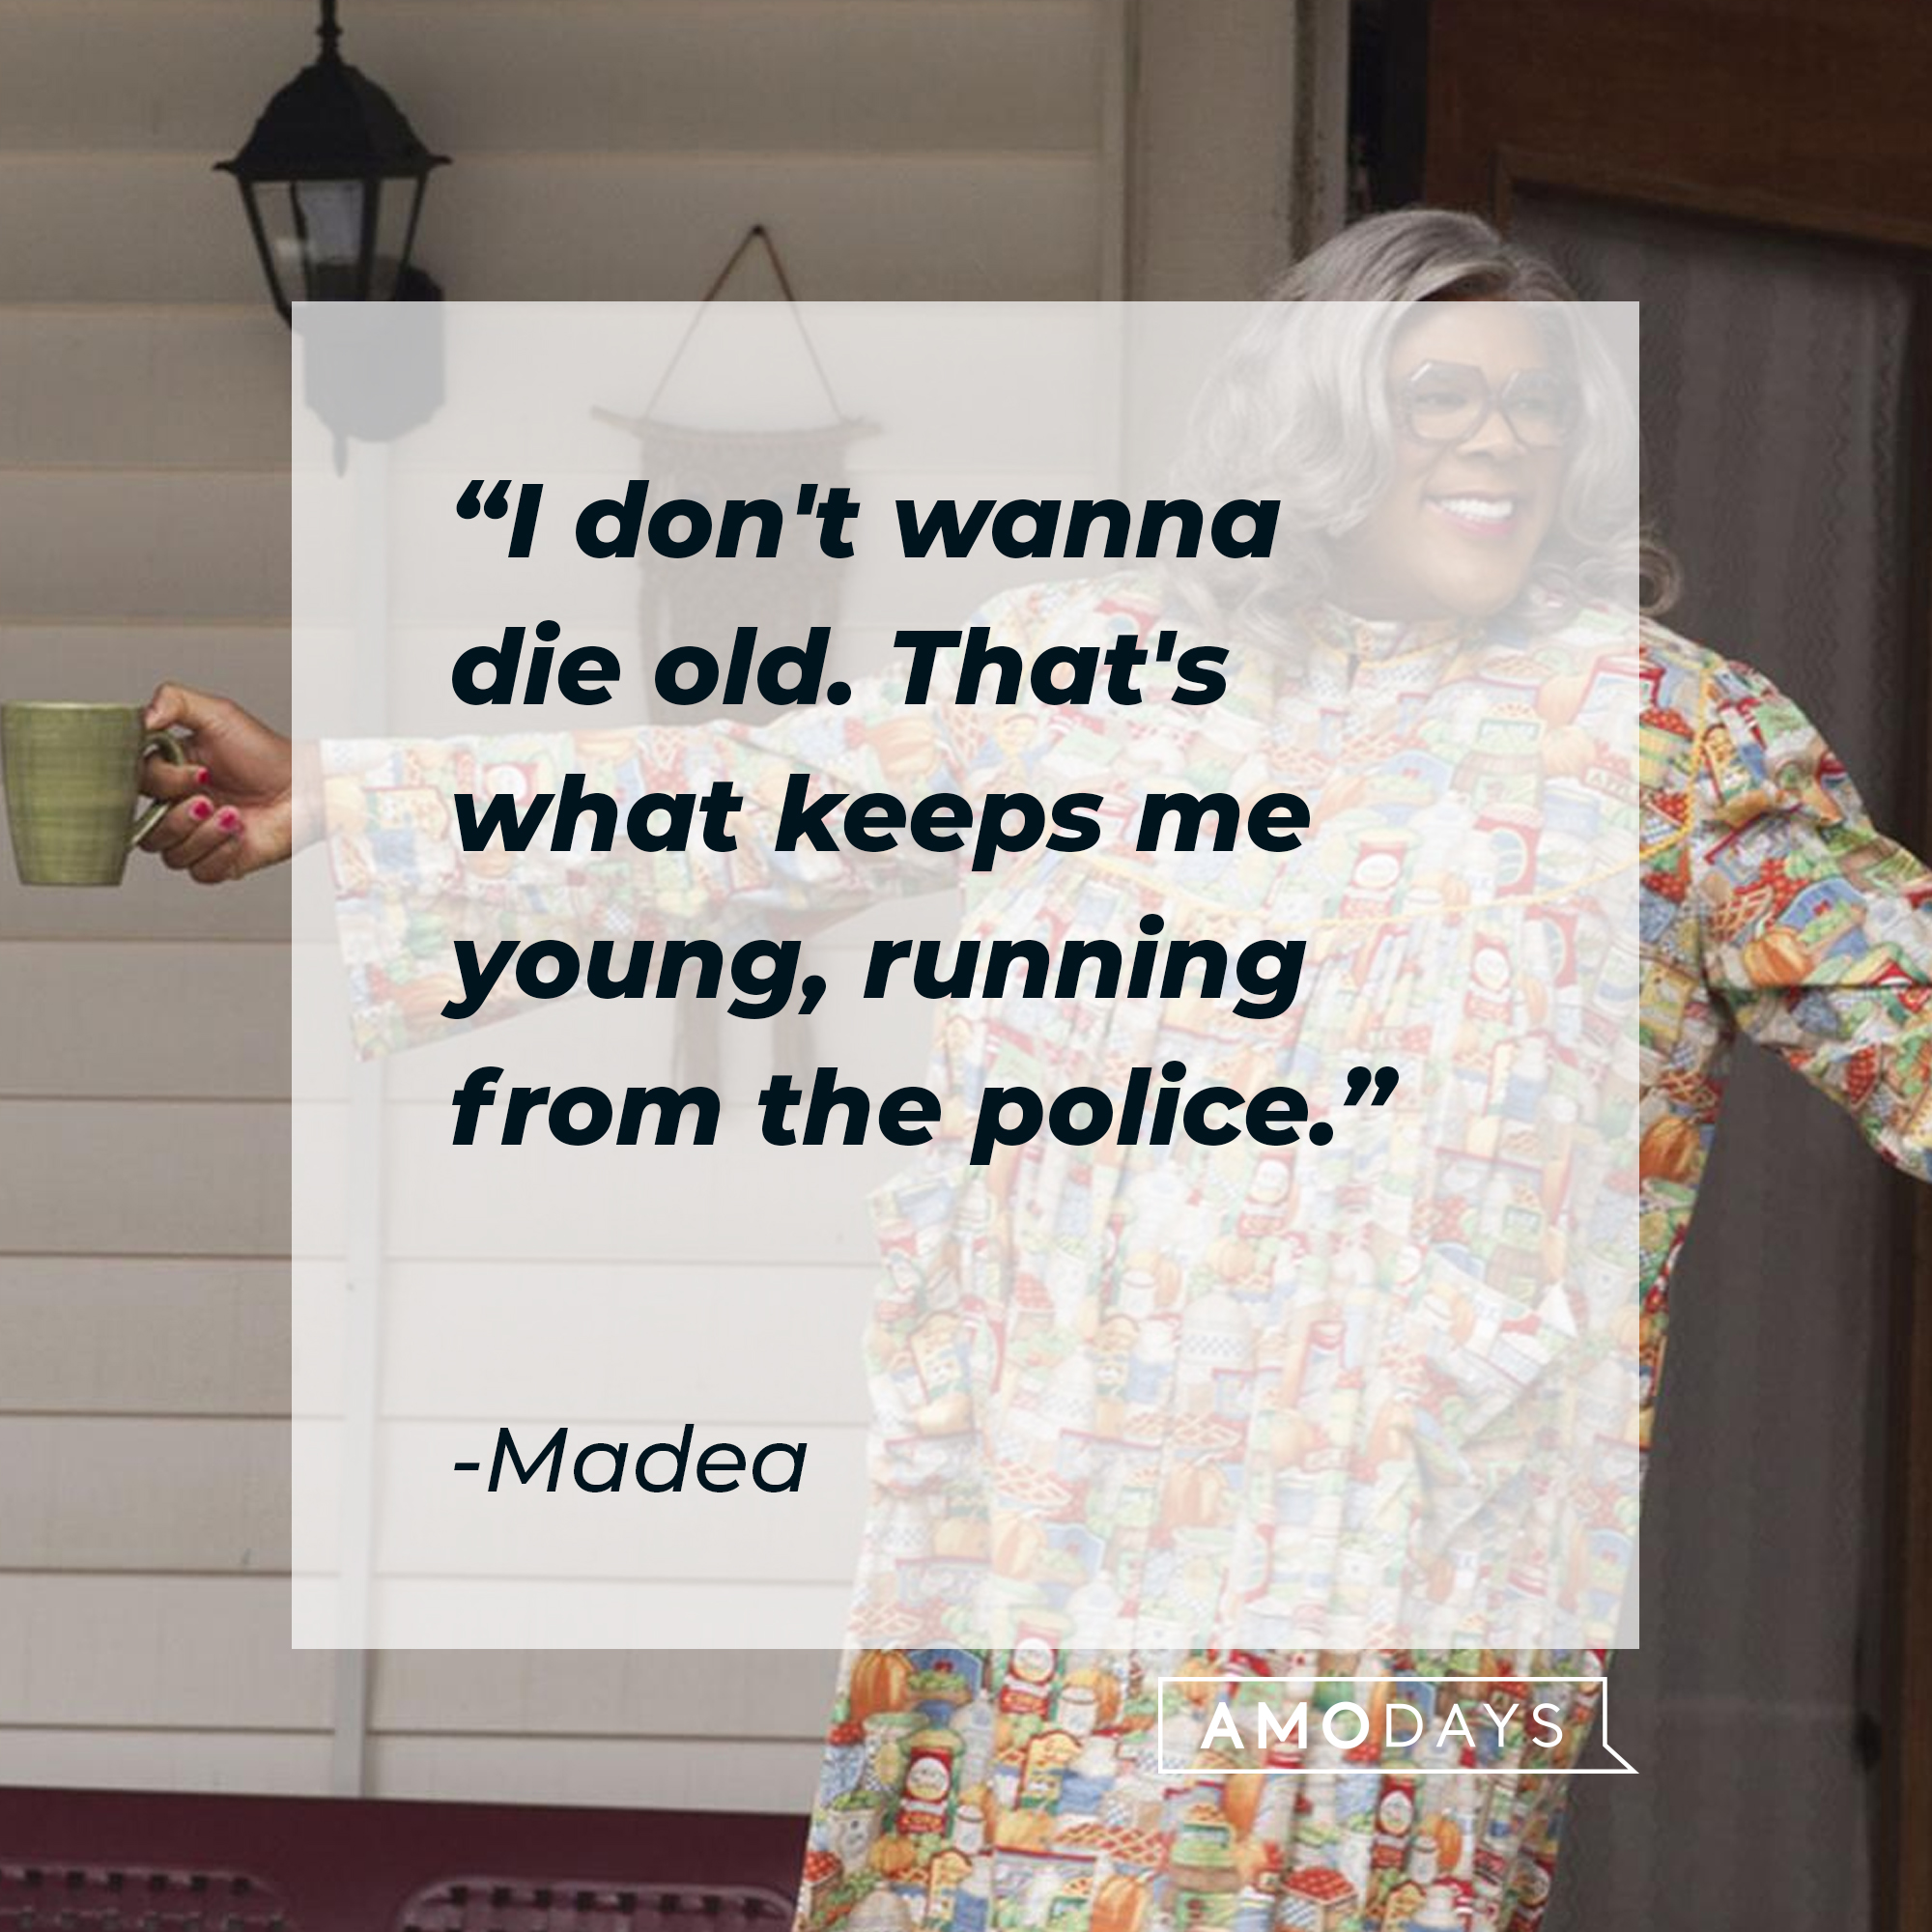 Madea's quote: "I don't wanna die old. That's what keeps me young, running from the police." | Source: Facebook.com/madea